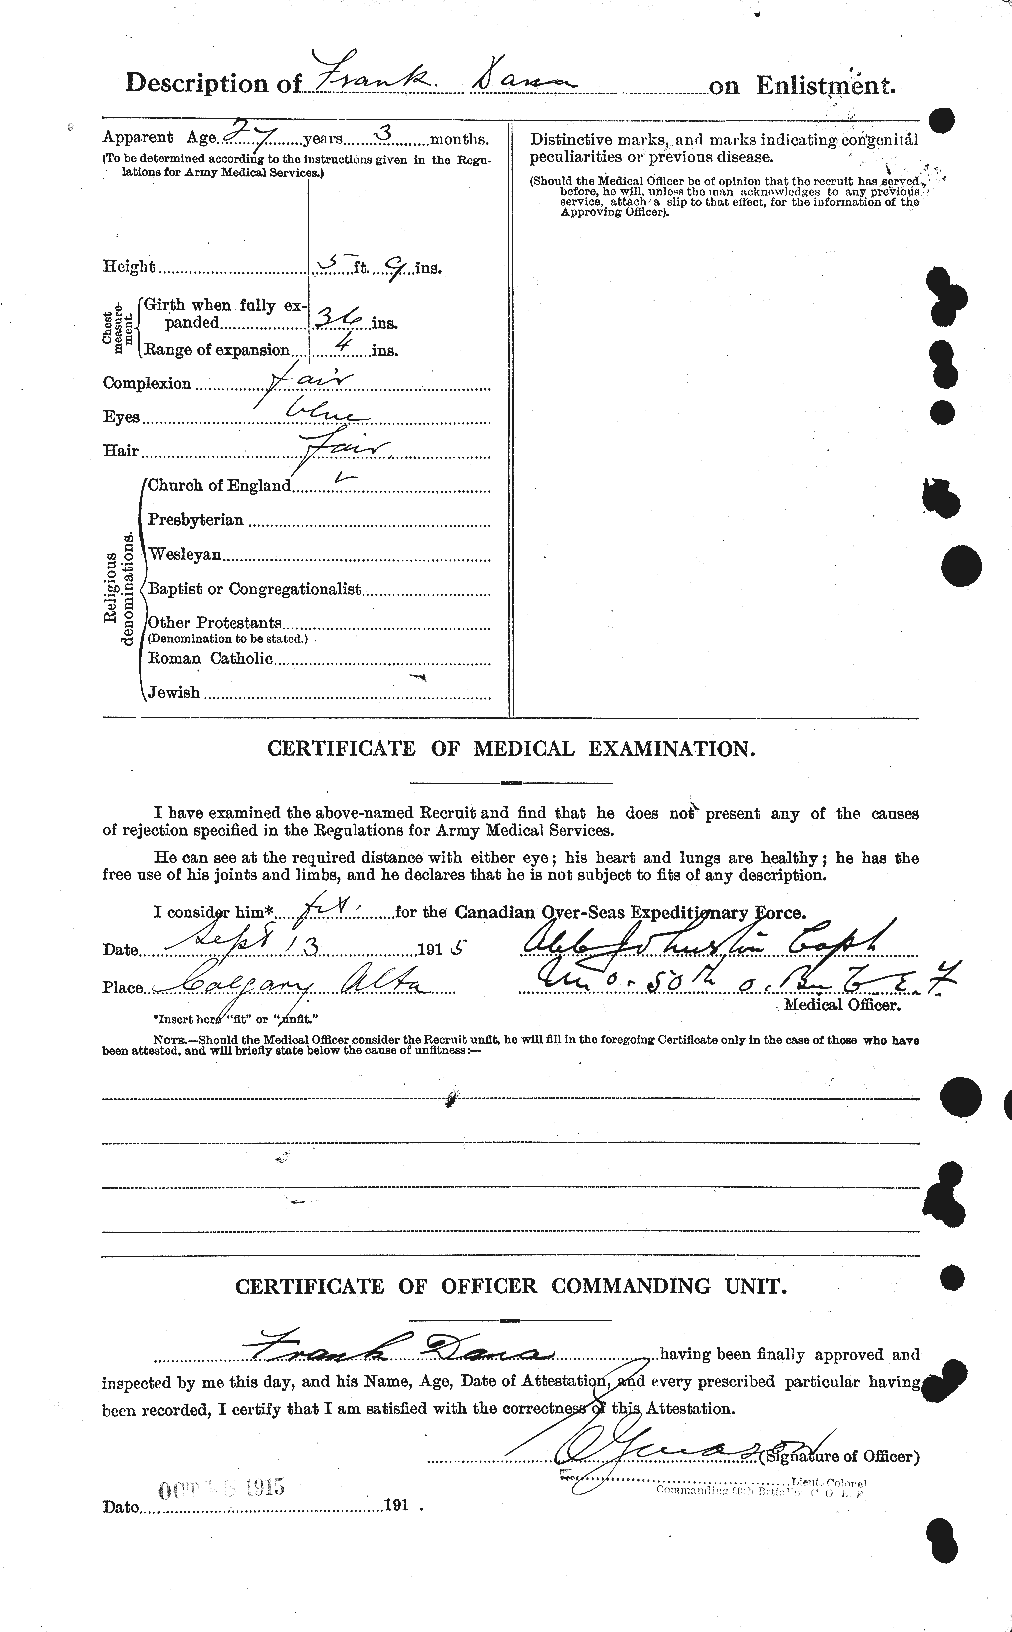 Personnel Records of the First World War - CEF 277397b